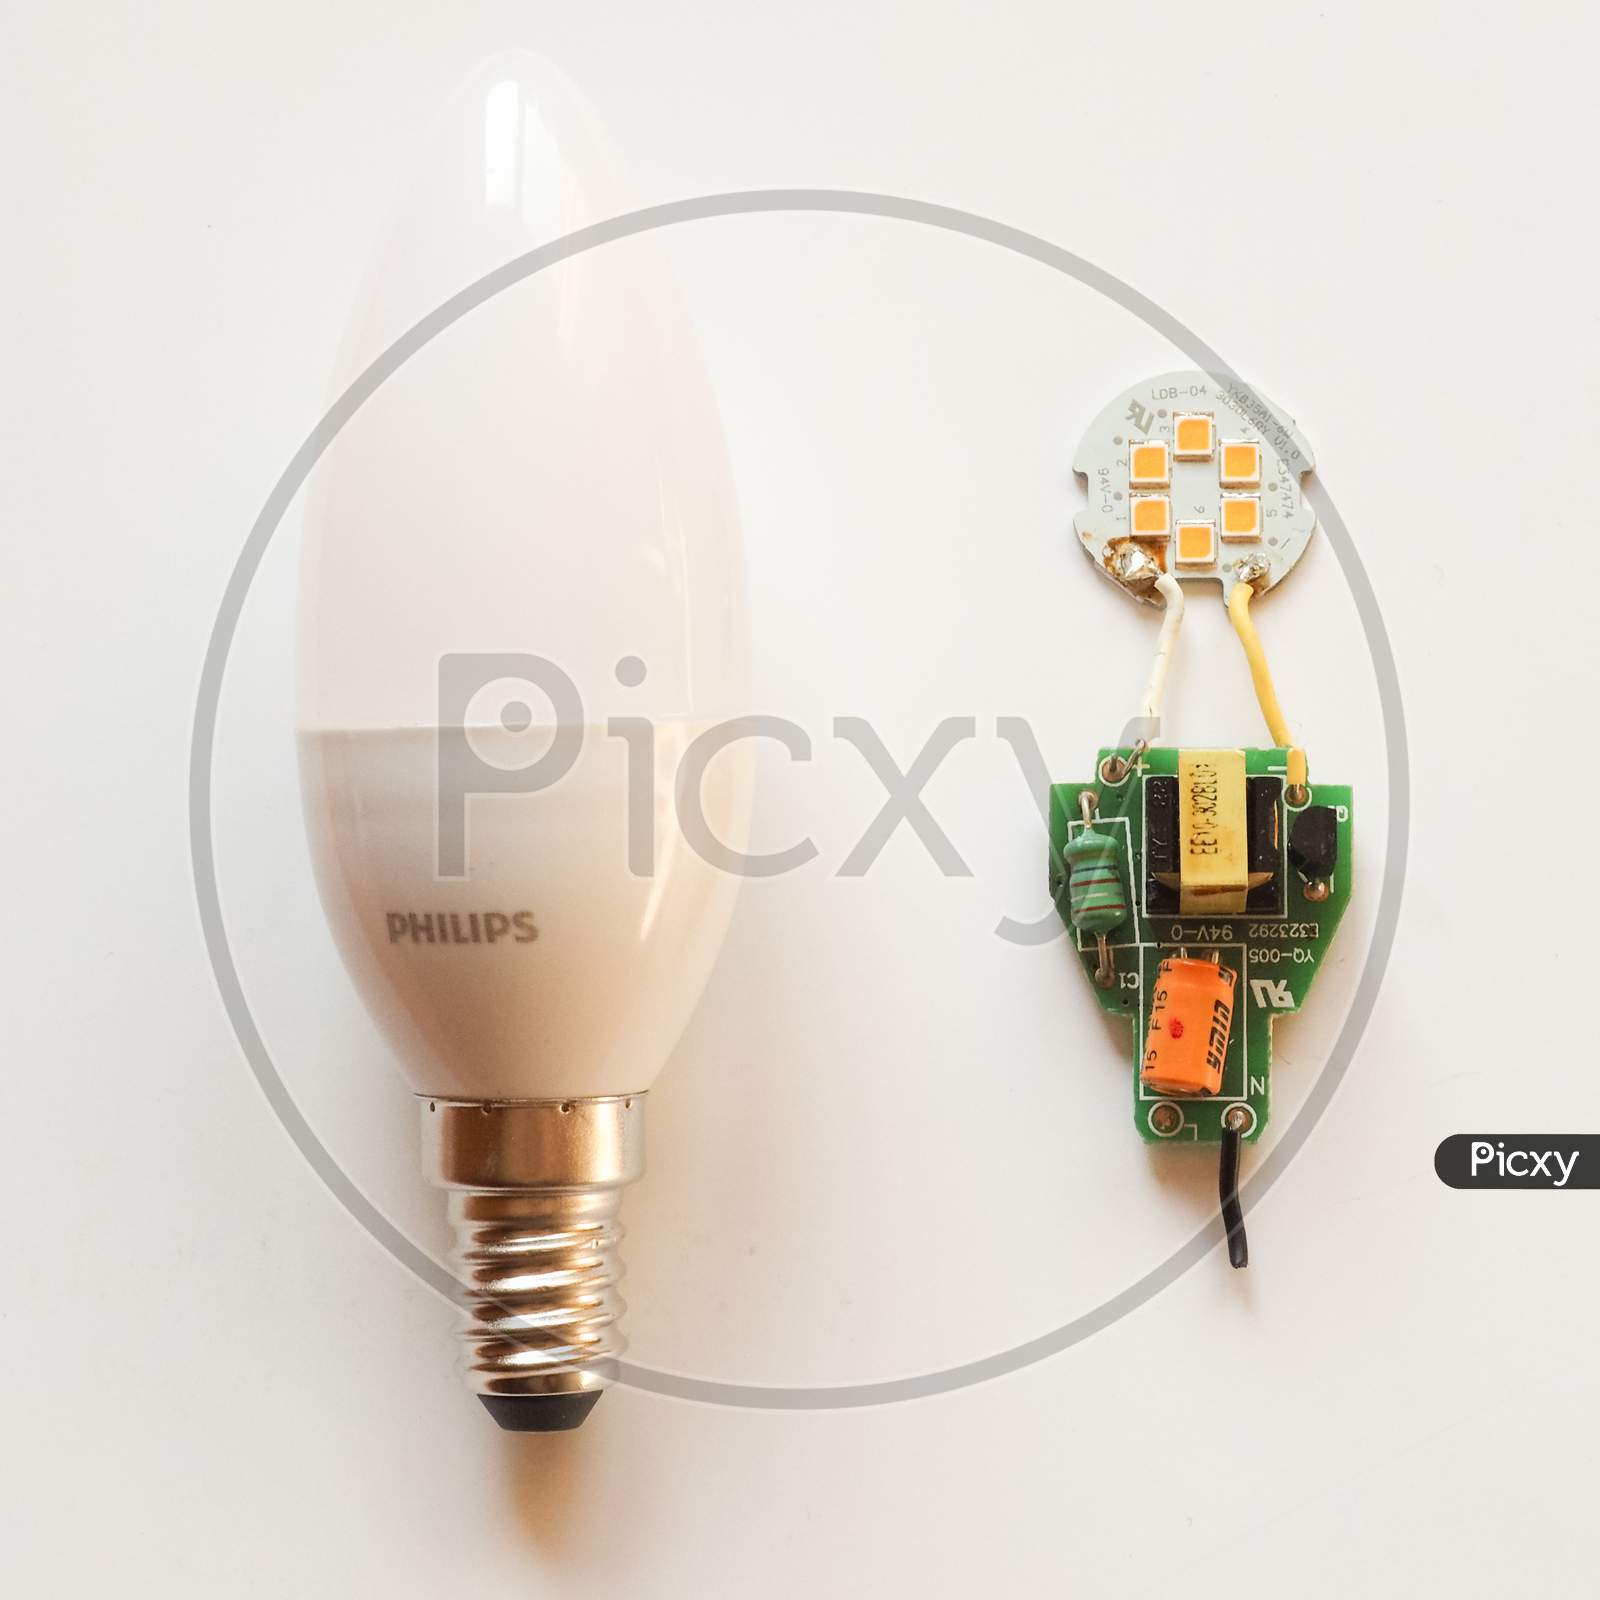 Amsterdam, Netherlands - Circa February 2018: Philips Led Light Showing Internal Electronic Components On A Printed Circuit Board